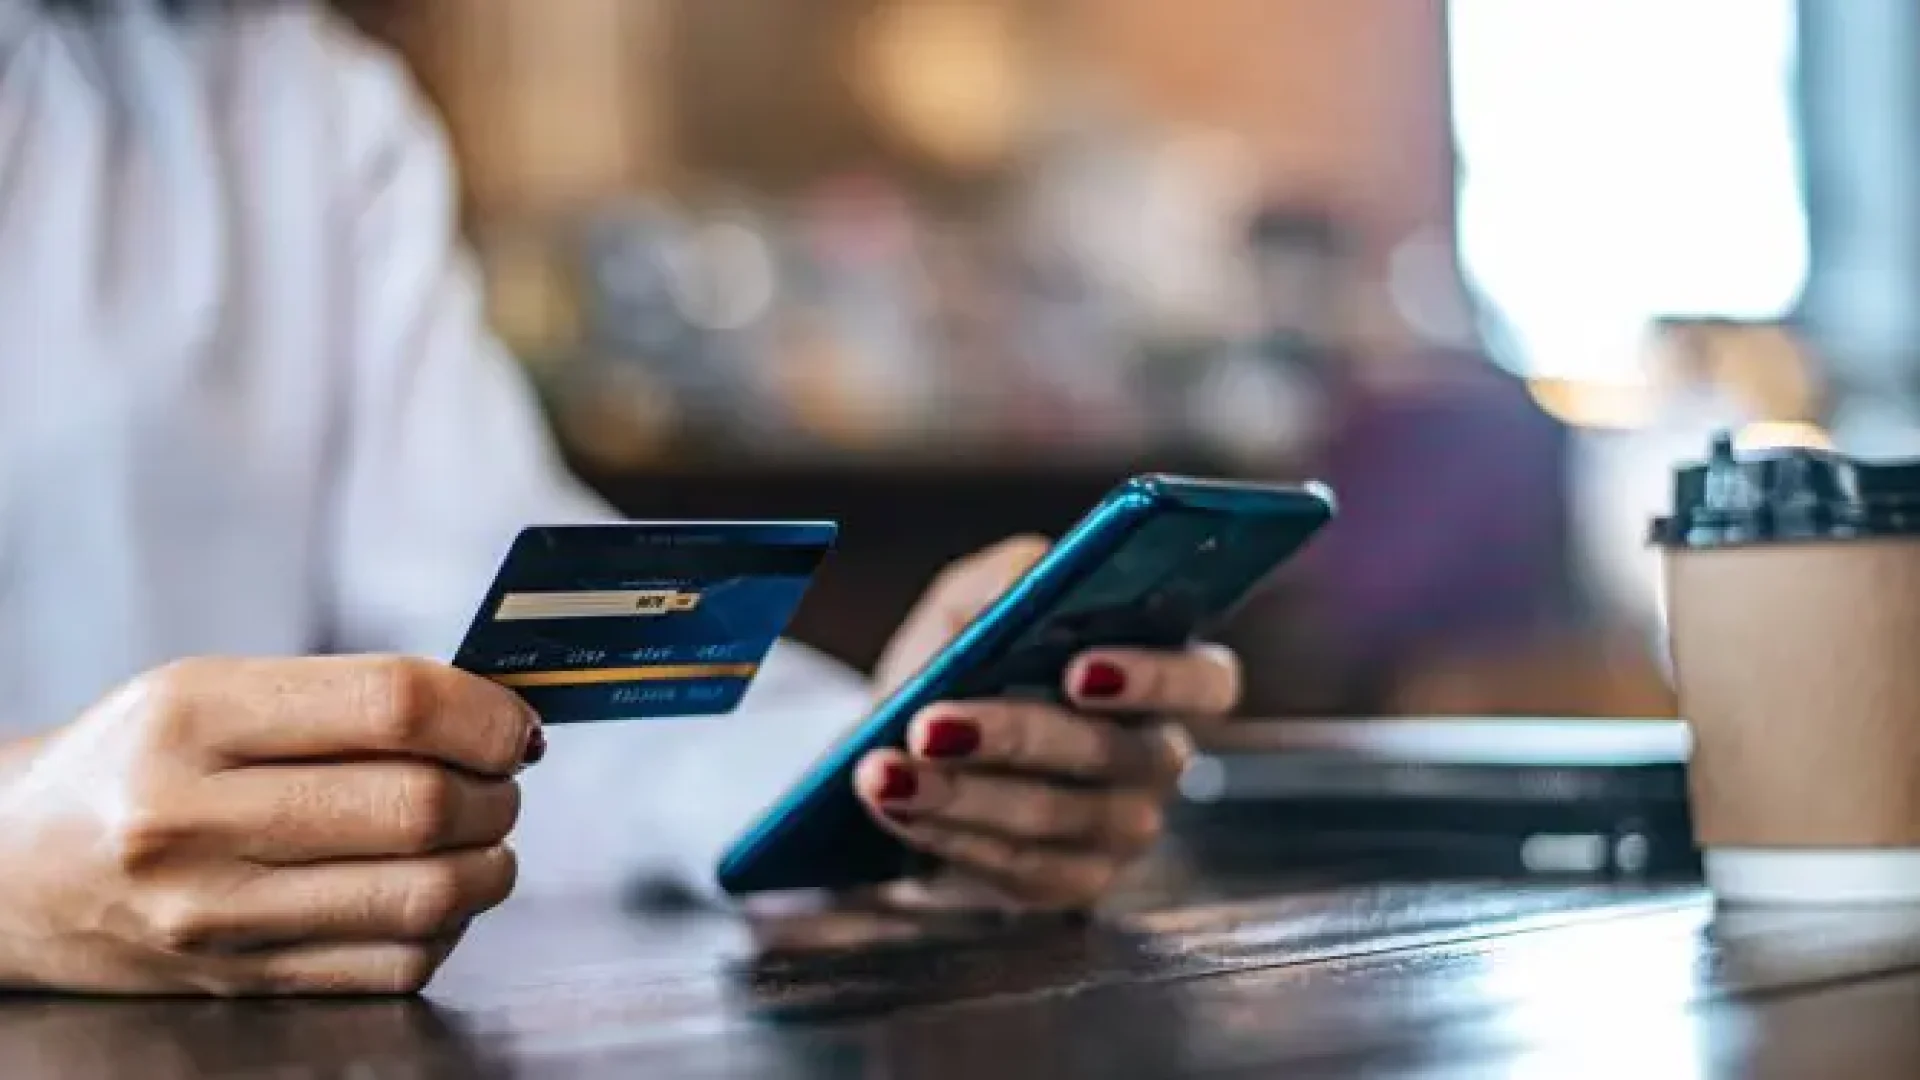 pay-goods-by-credit-card-through-smartphone-coffee-shop-750x375